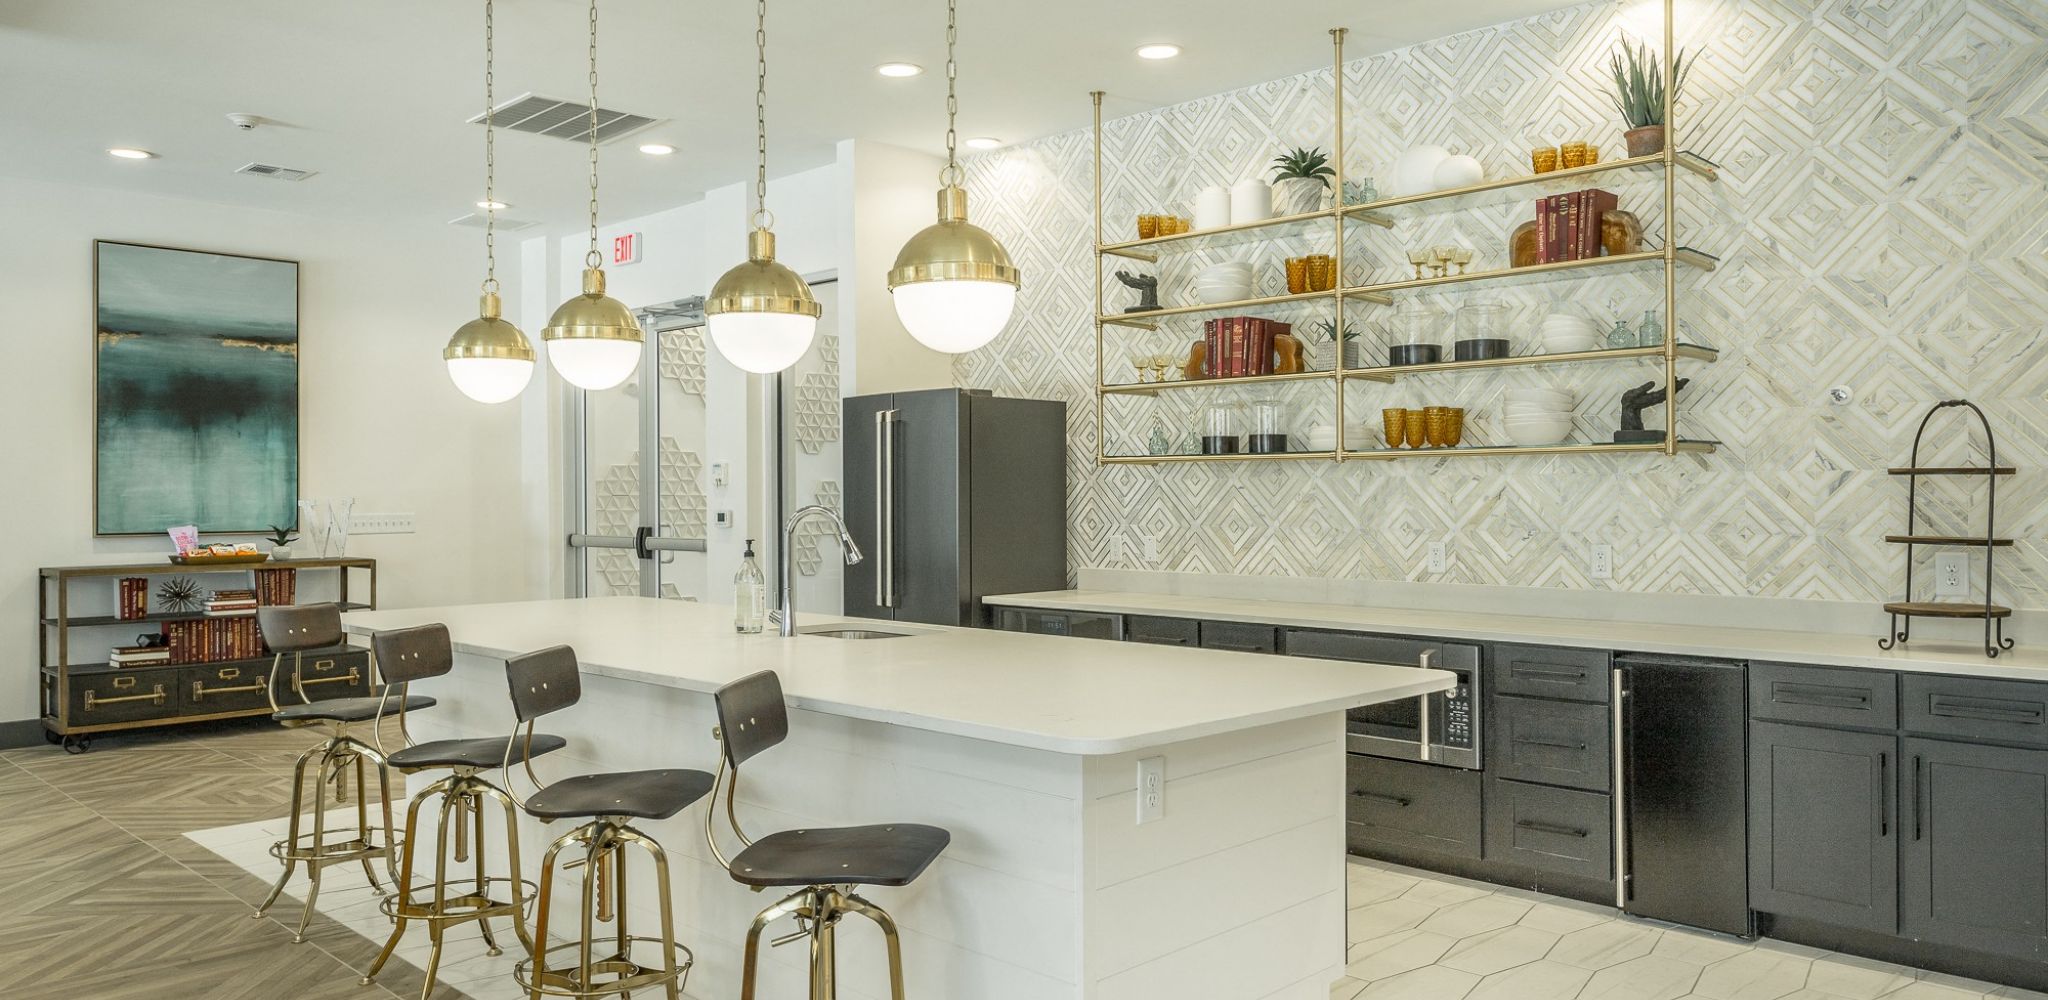 Hawthorne at the W amenity entertainment space with kitchen and beautiful finishes